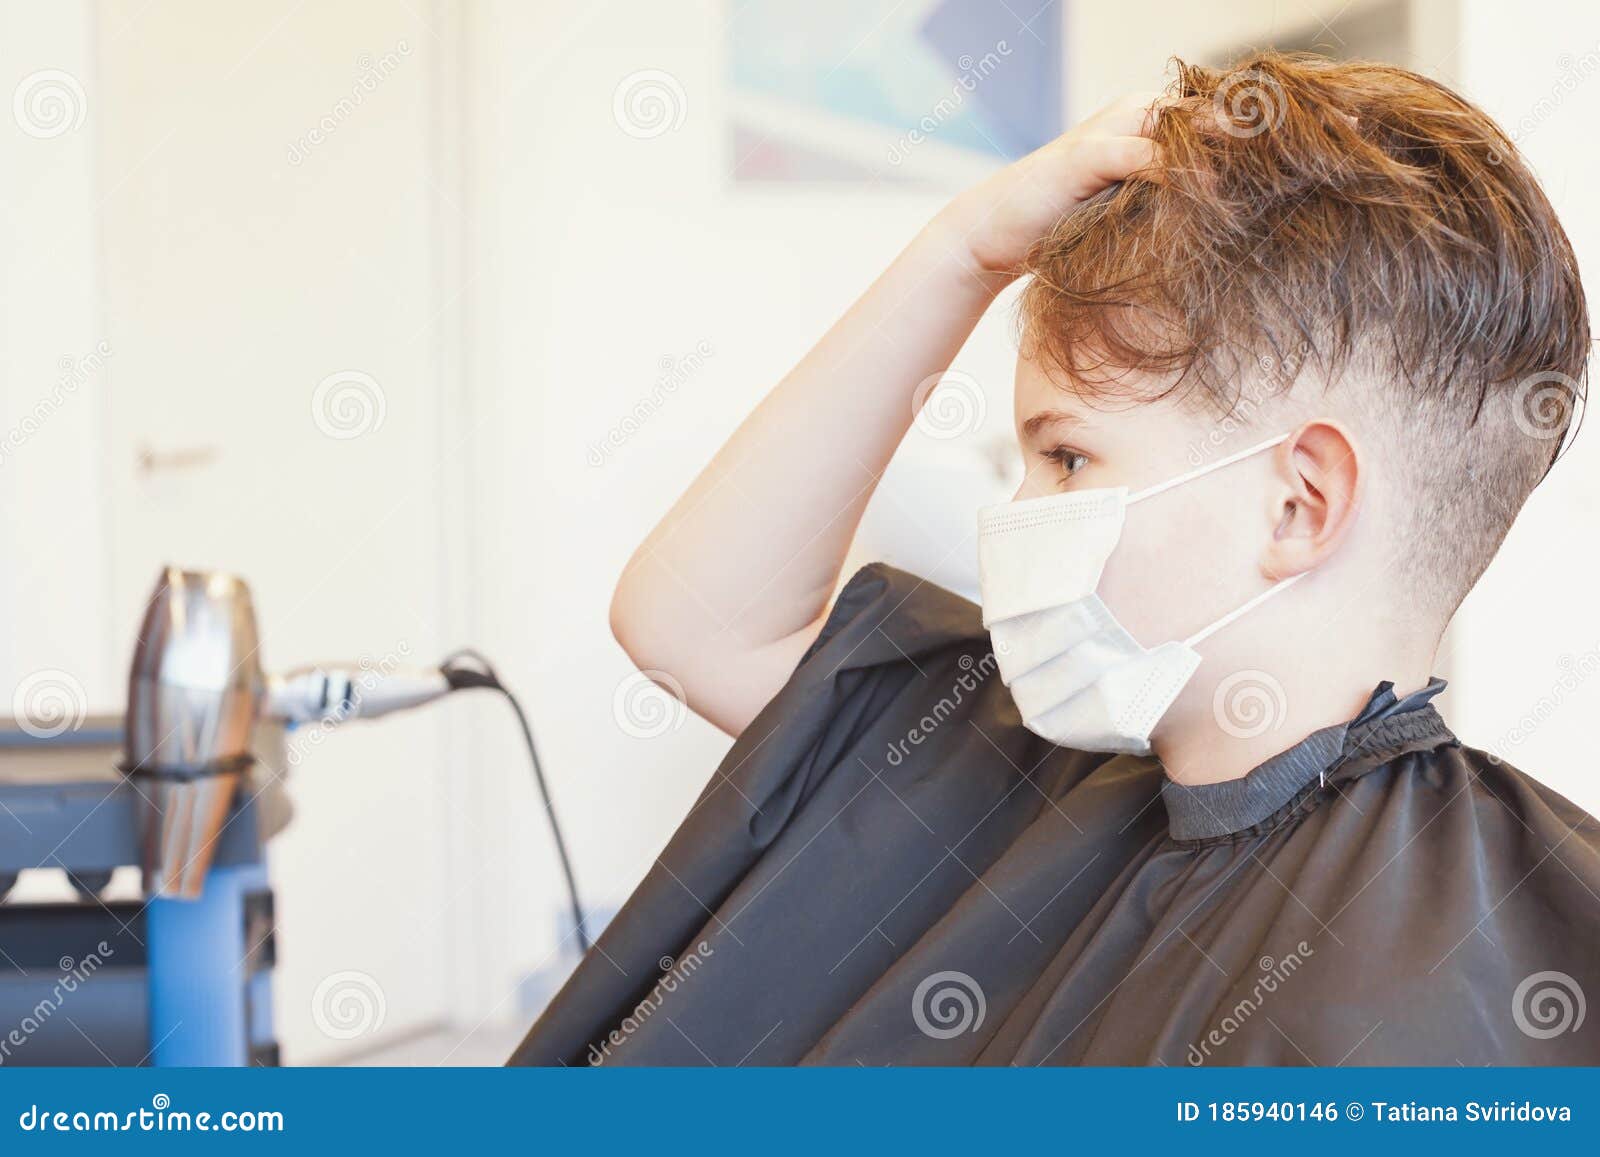 Caucasian Boy Getting Hair Cut at the Barbershop Wearing Mask. New Normal  Stock Photo - Image of face, pandemic: 185940146